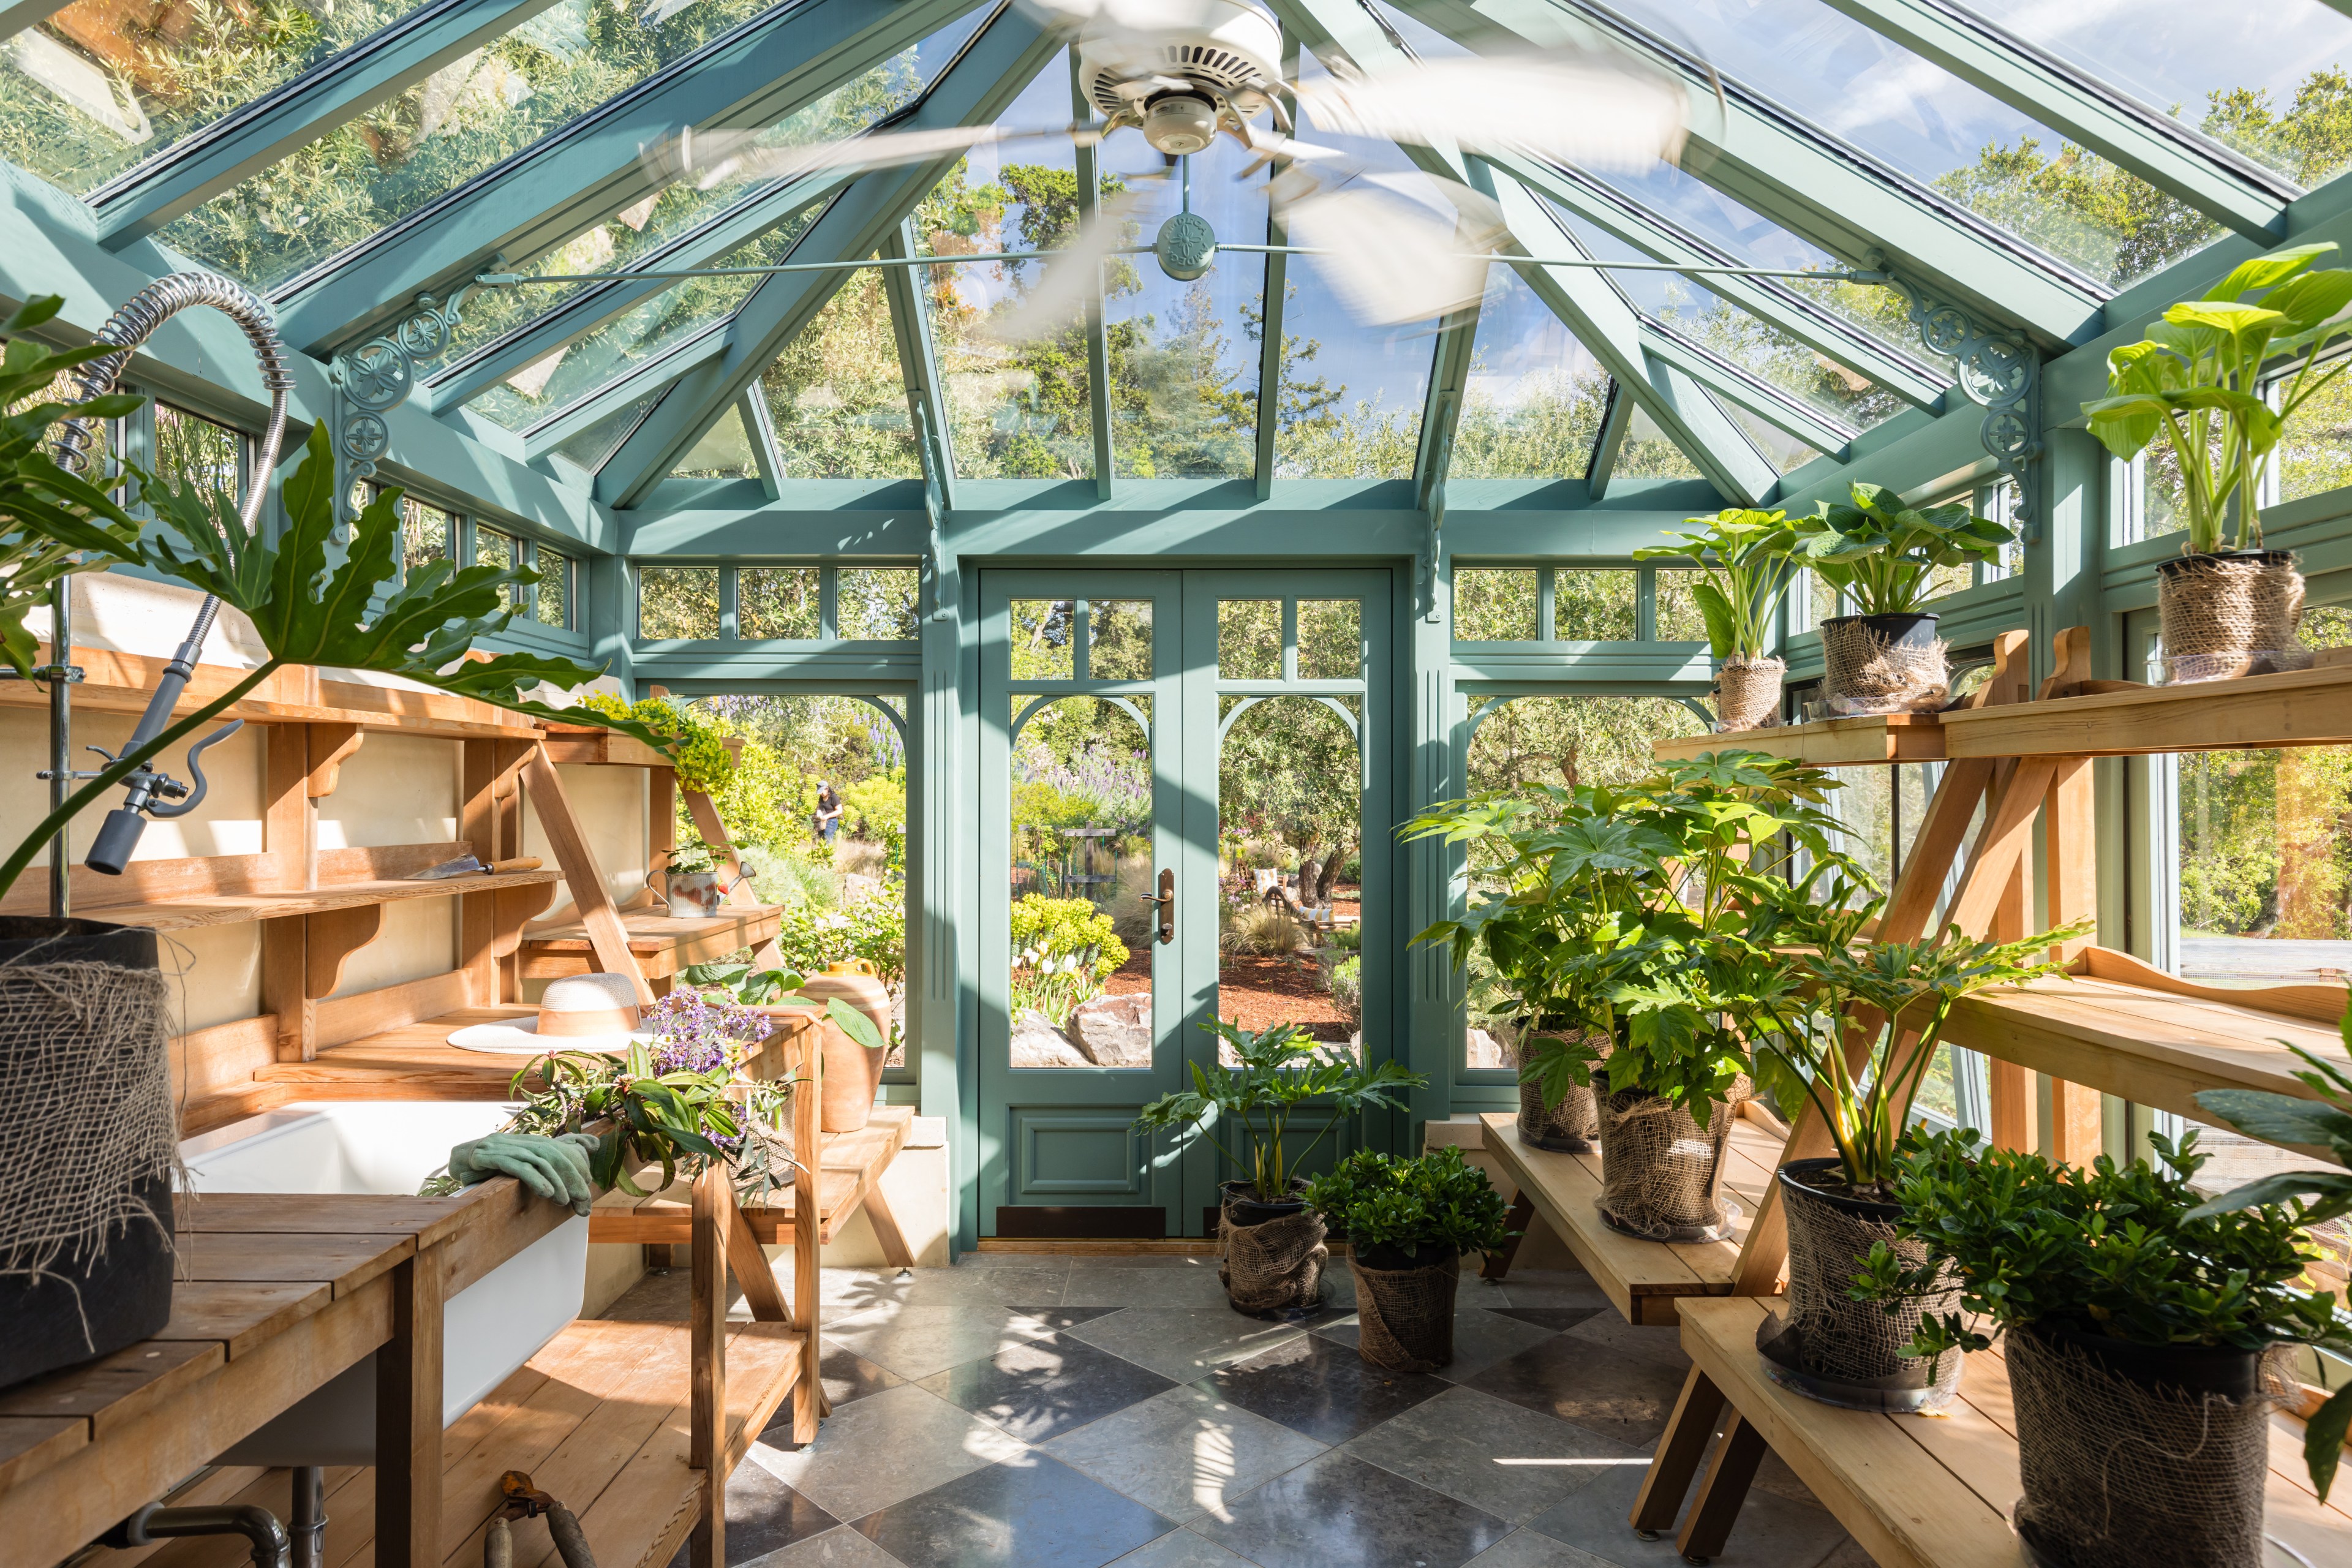 A sunlit conservatory with teal woodwork, filled with green plants, wooden benches, and a ceiling fan.